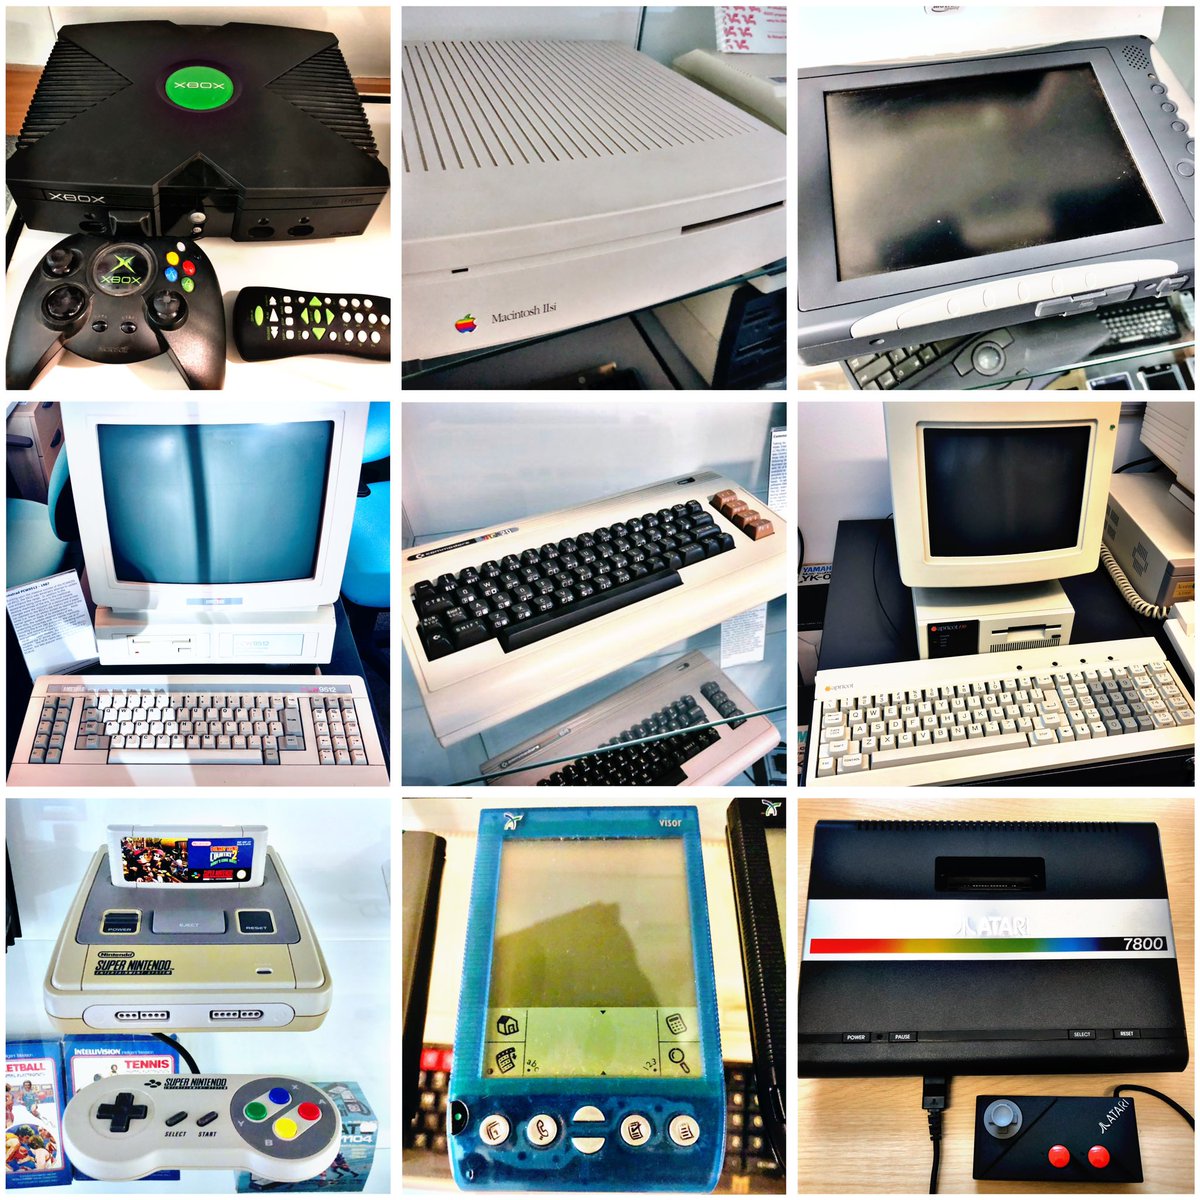 This week’s #RetroEnnead offers you the #Xbox, #MacintoshIIsi, #DuoTouch, #PCW9512, #VIC20, #F10, #SNES, #Visor and #Atari7800. Pick a line of 3 and dump the rest! #RetroComputing #ComputerHistory #RetroGaming #VideoGames